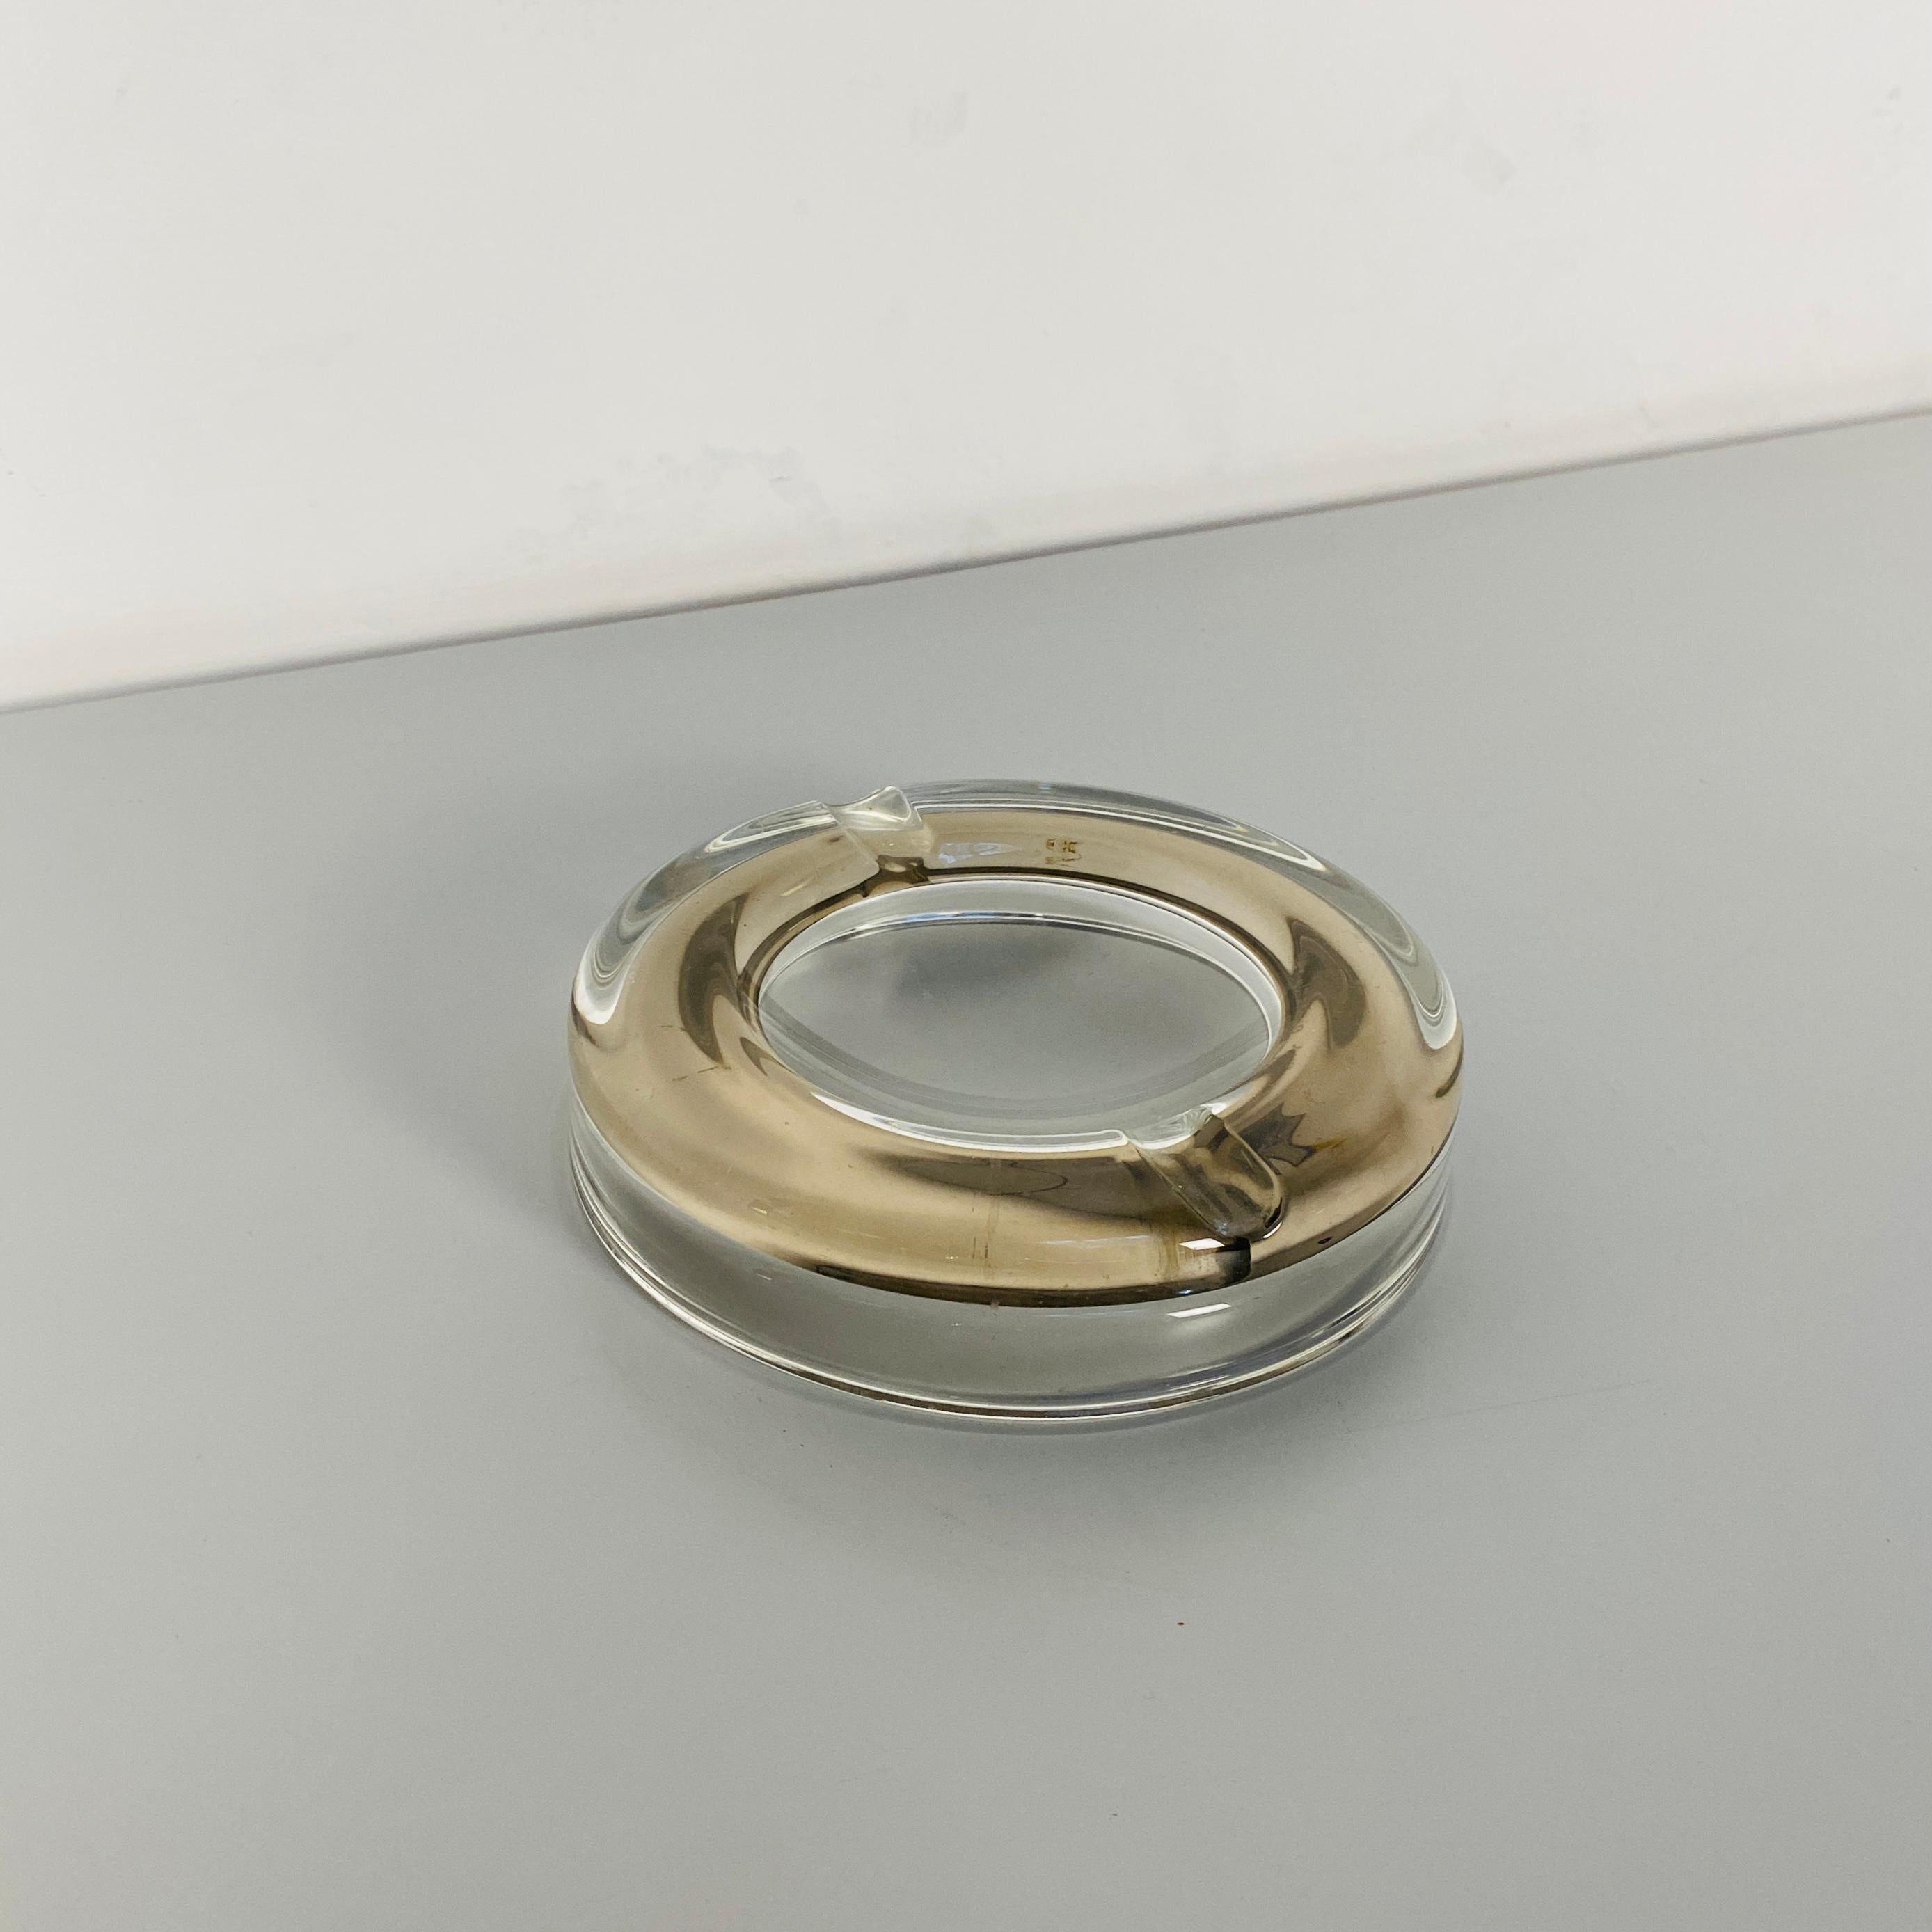 Italian Mid-Century Modern Glass Ashtray with Internal Decoration, 1970s For Sale 2